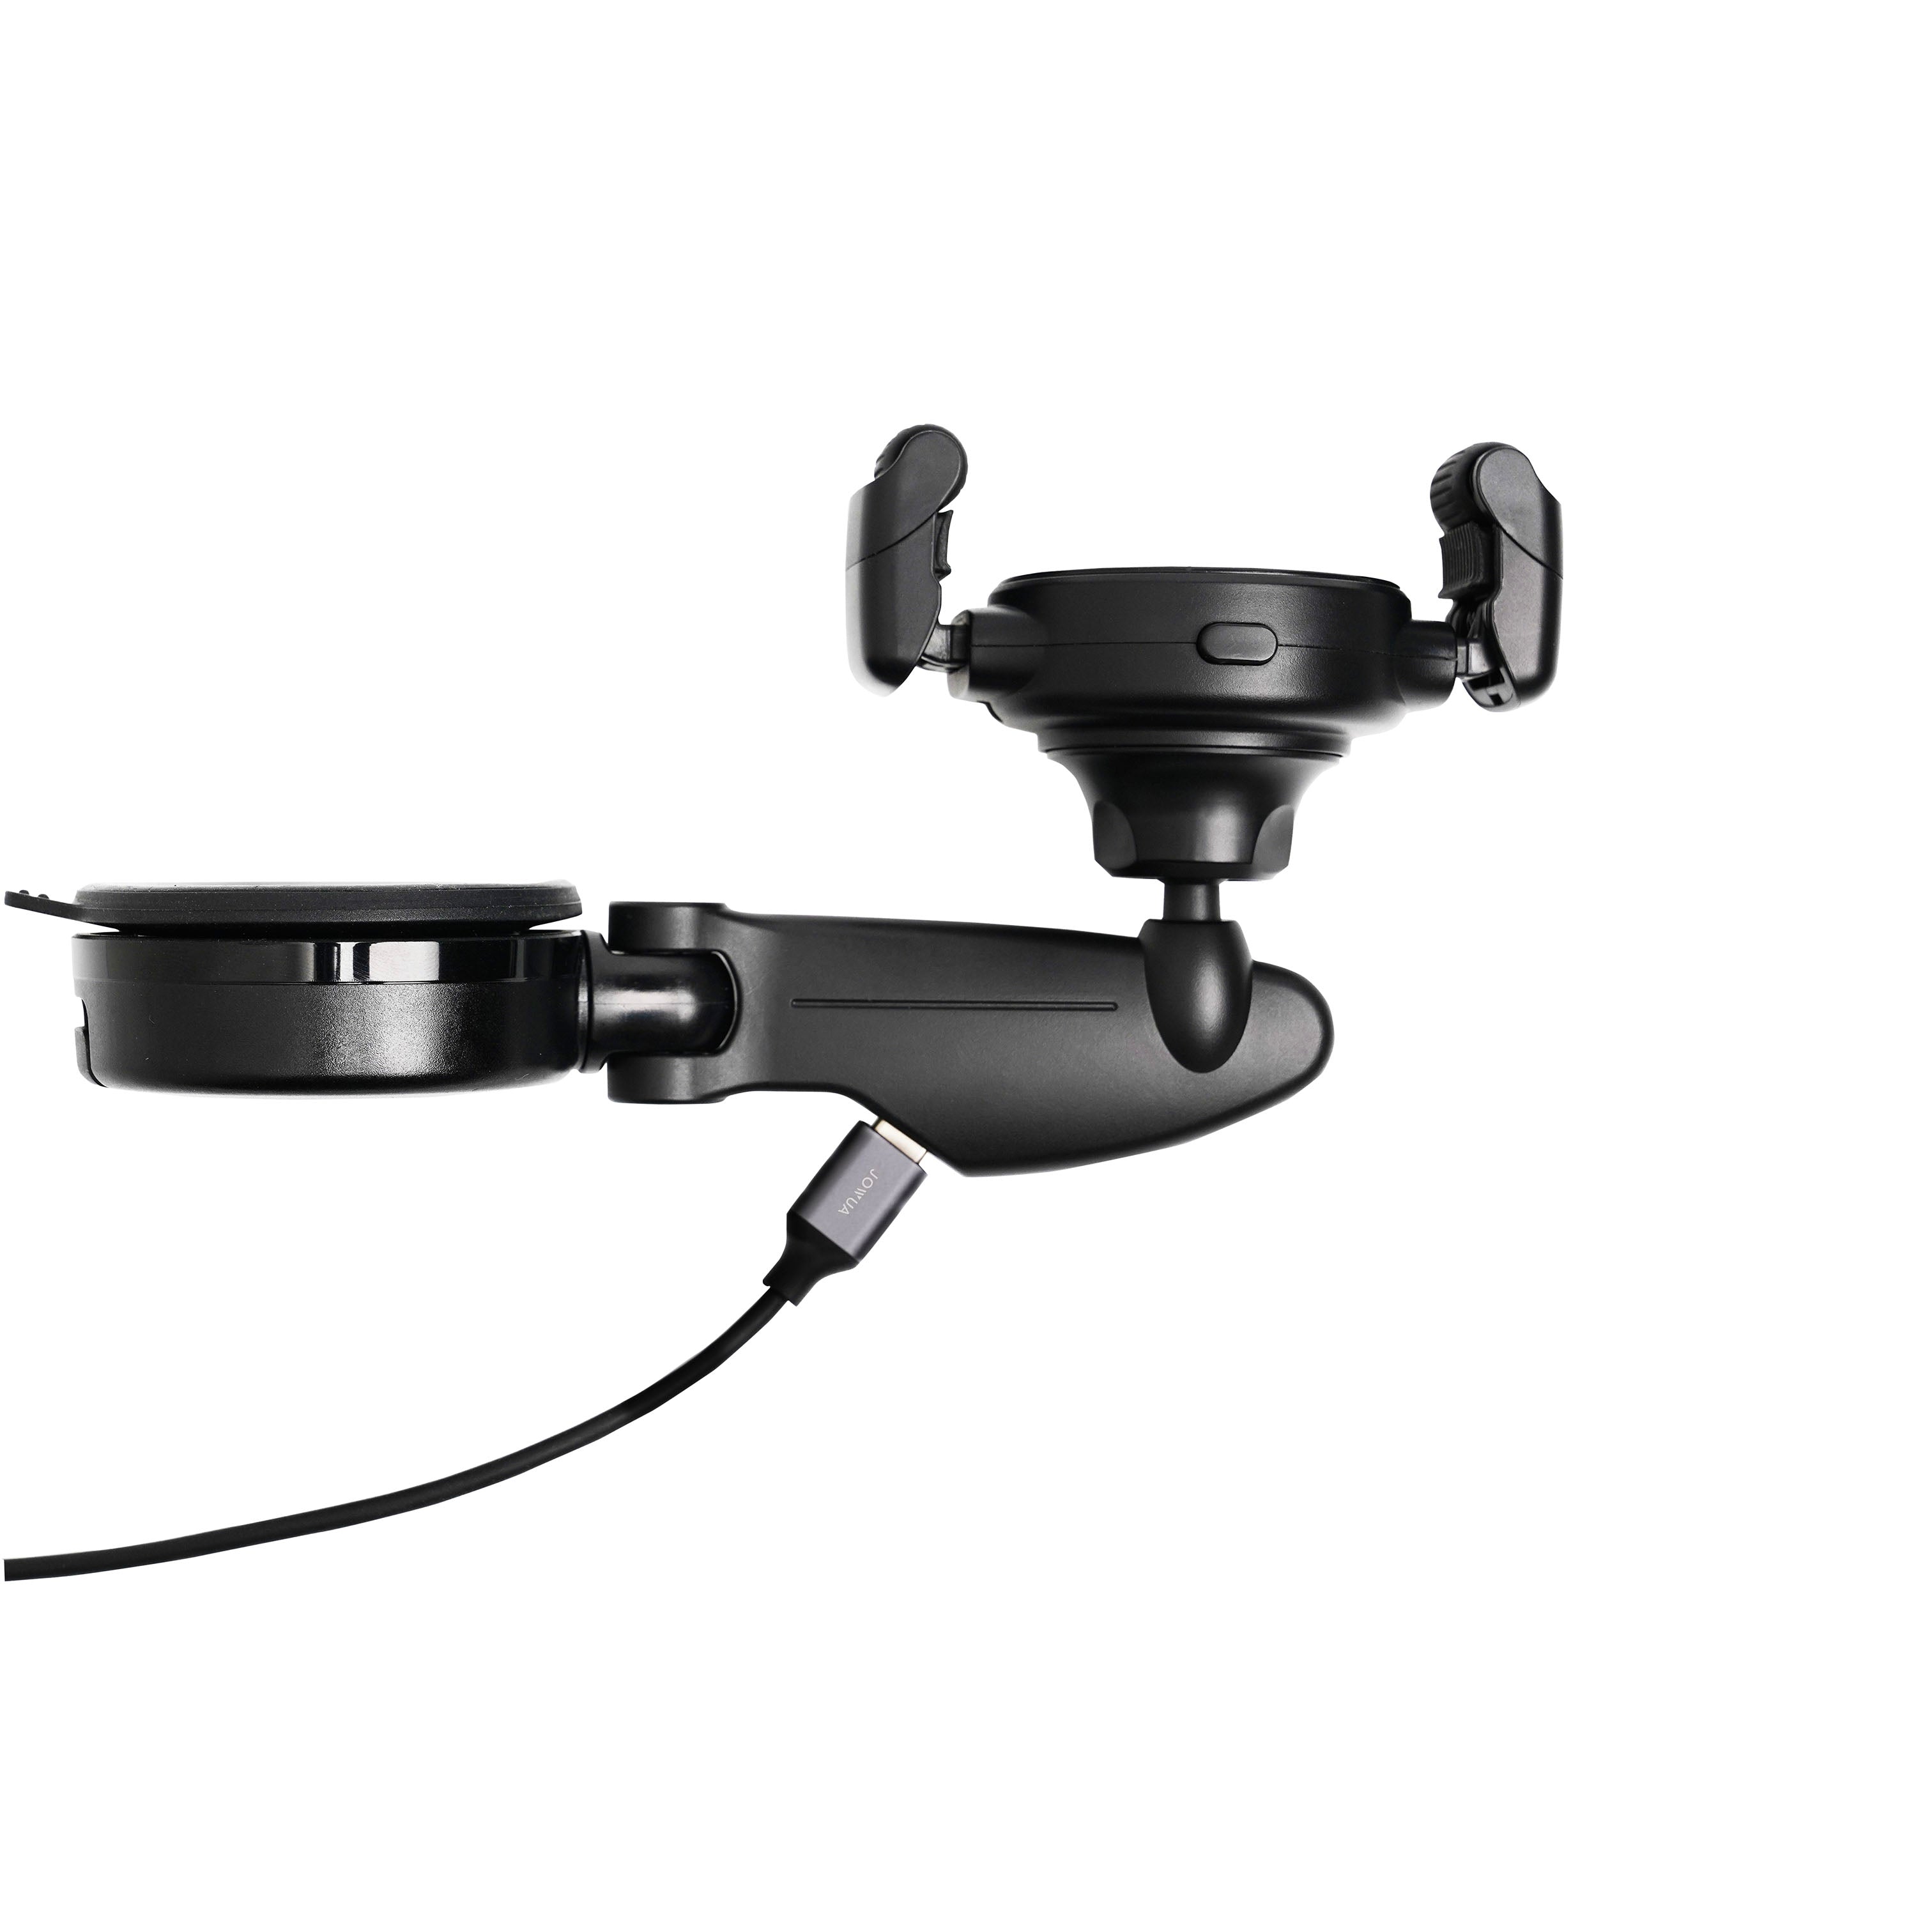 Rotating Phone Holder with Grip Mount